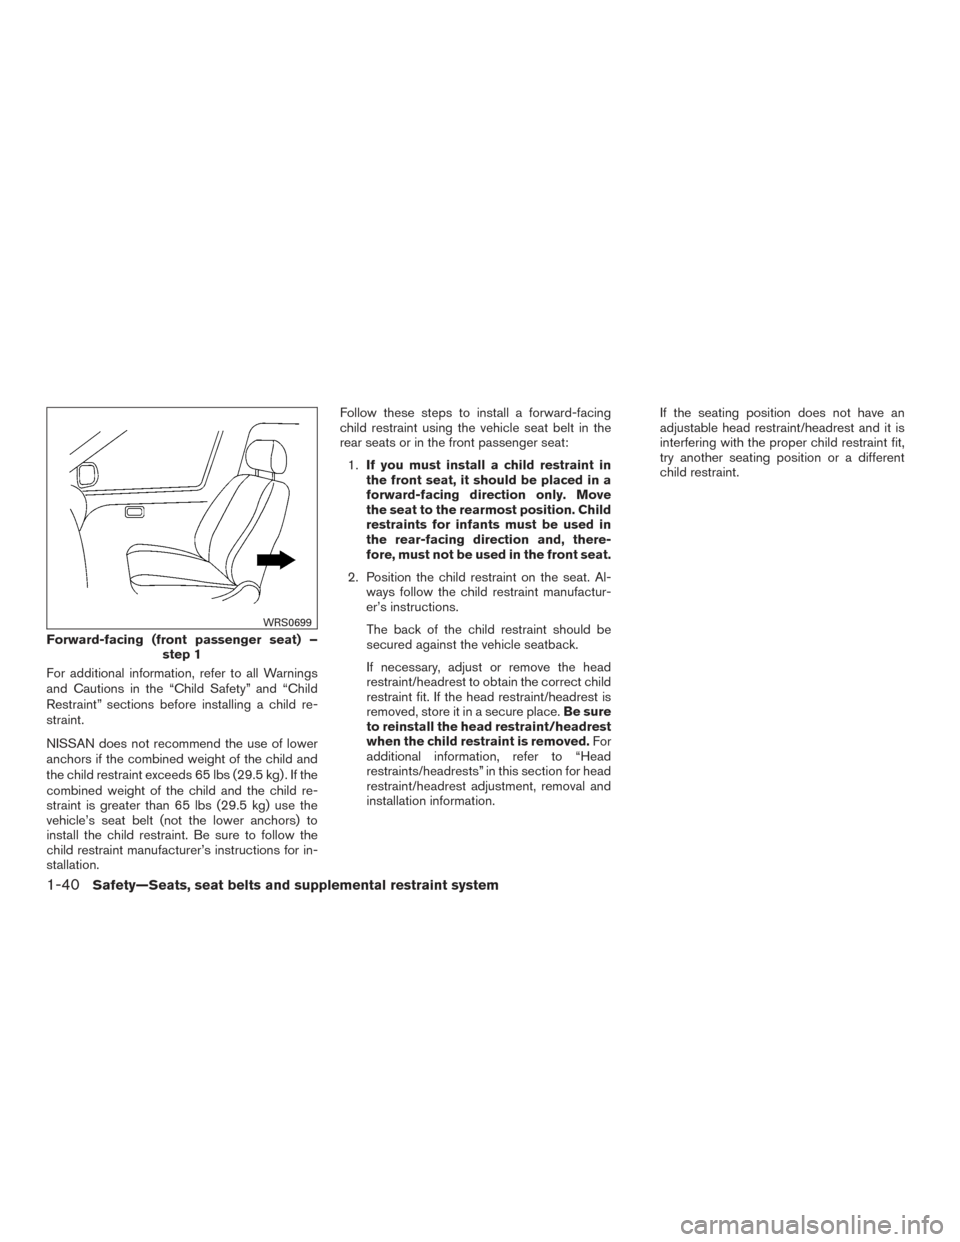 NISSAN XTERRA 2015 N50 / 2.G Owners Manual For additional information, refer to all Warnings
and Cautions in the “Child Safety” and “Child
Restraint” sections before installing a child re-
straint.
NISSAN does not recommend the use of 